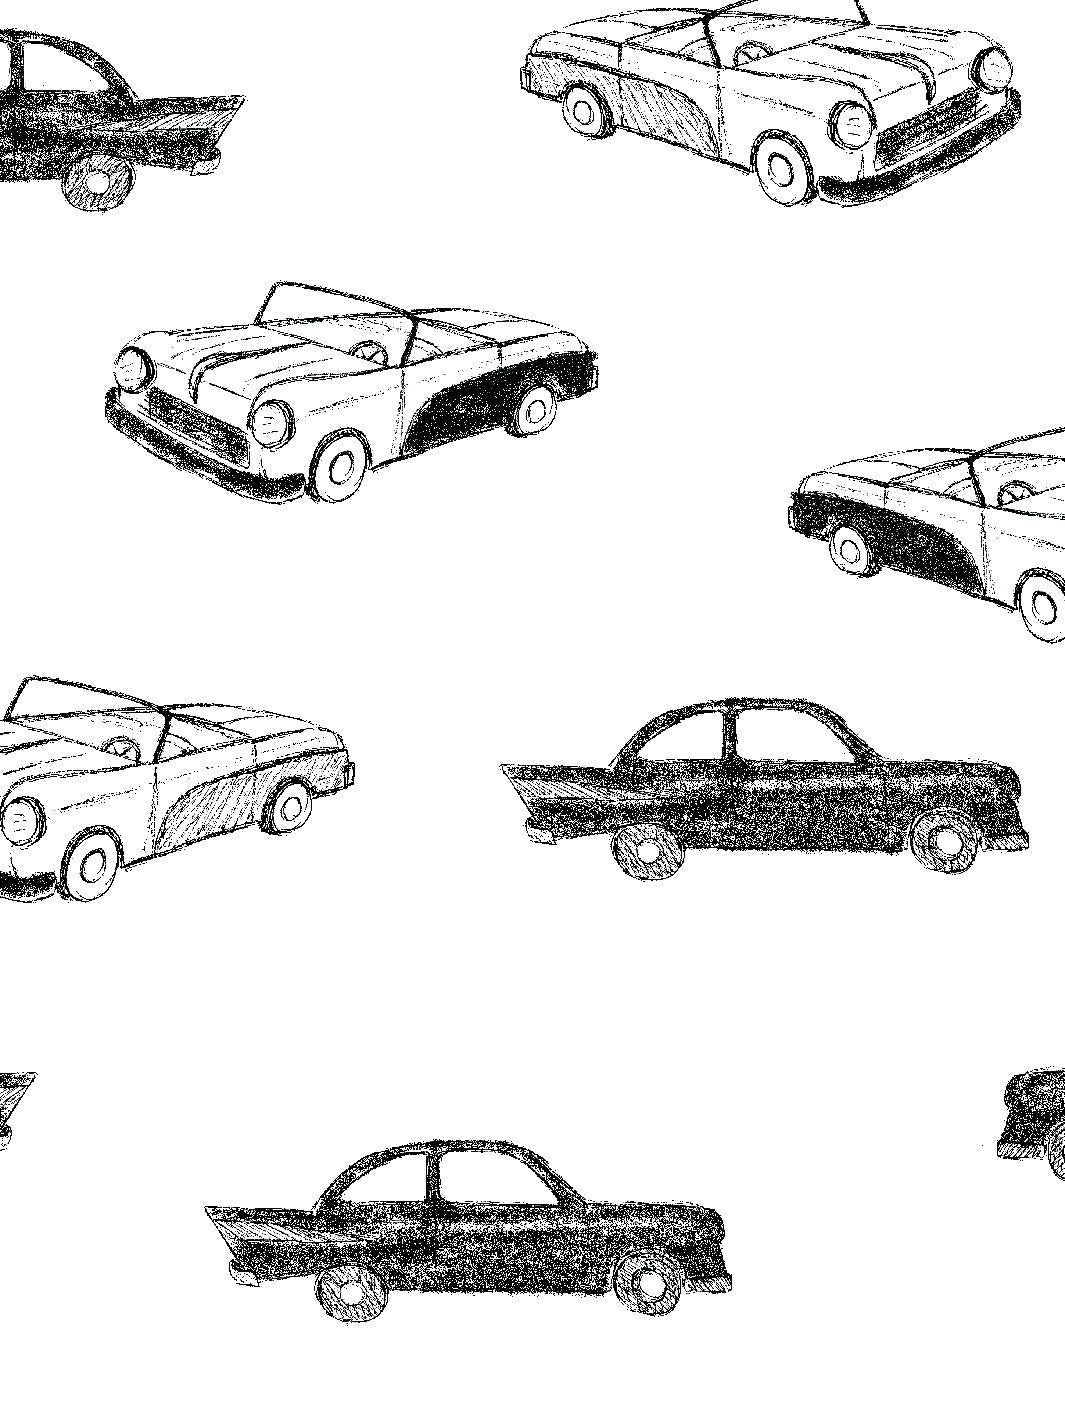 'Classic Cars' Wallpaper by Tea Collection - Onyx